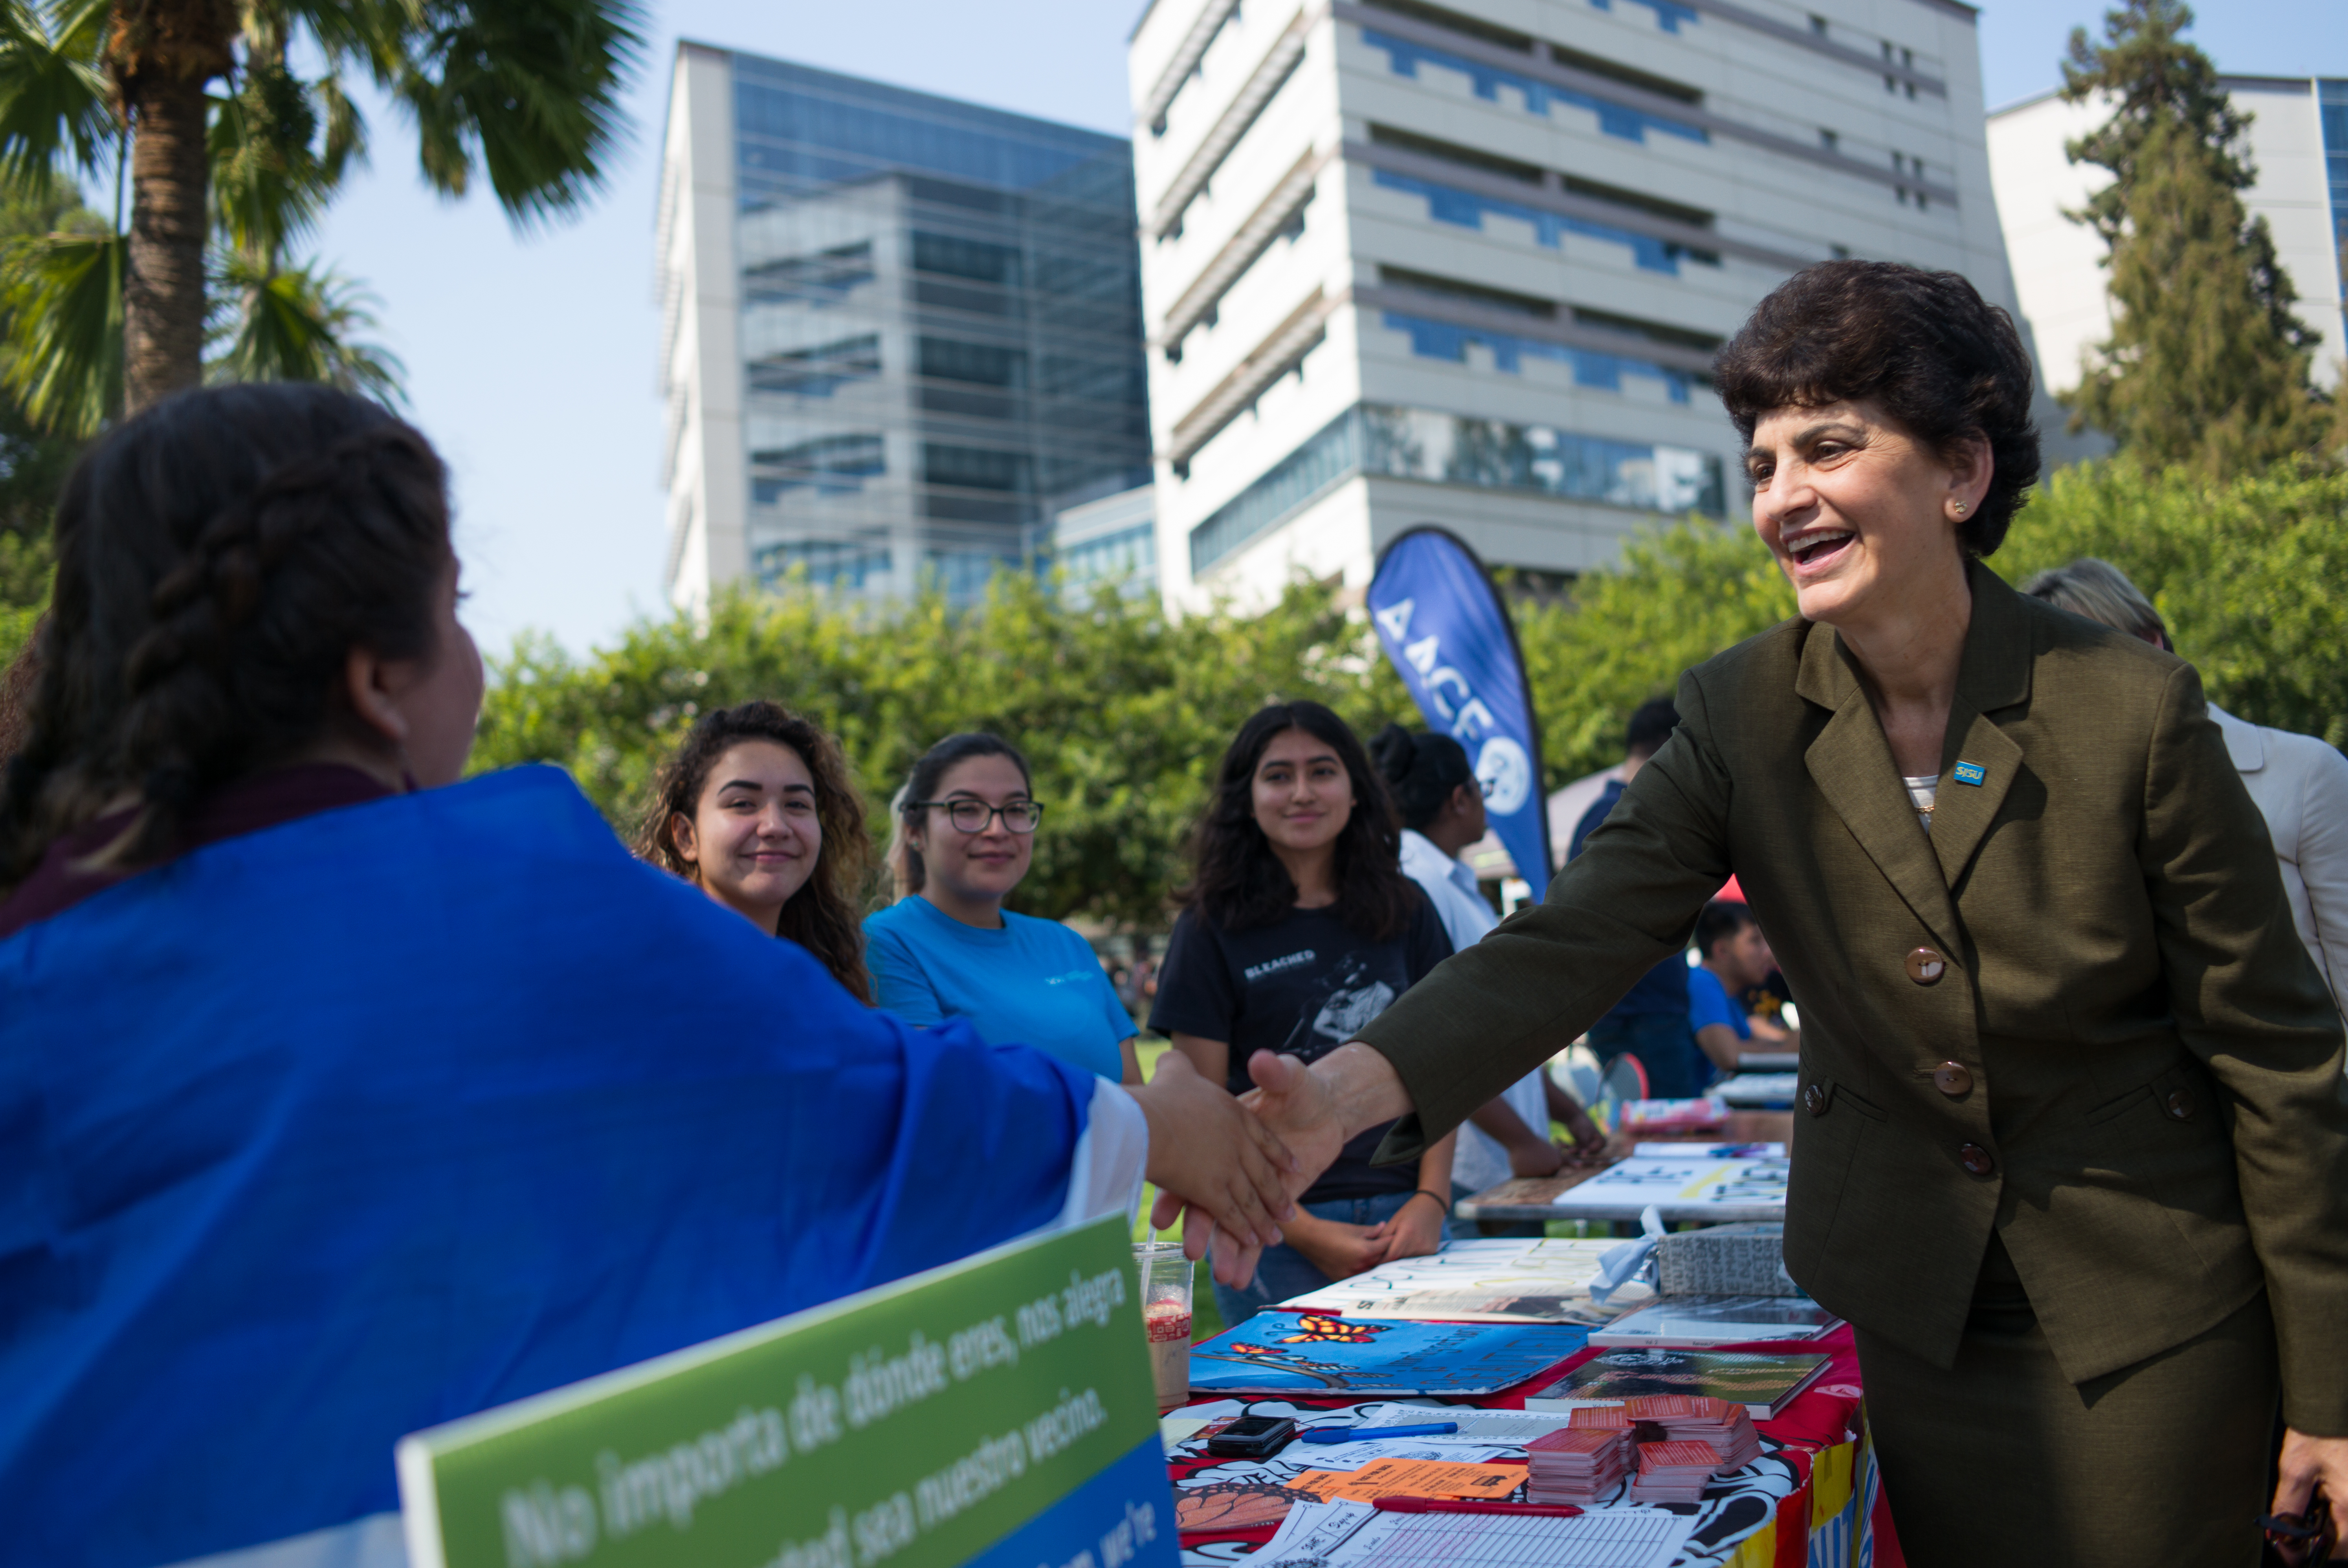 President Mary Papazian meets with Student Advocates for Higher Education as she visited clubs tabling outside Tower Hall on Tuesday, Sept. 5, 2017. (James Tensuan/San Jose State University)